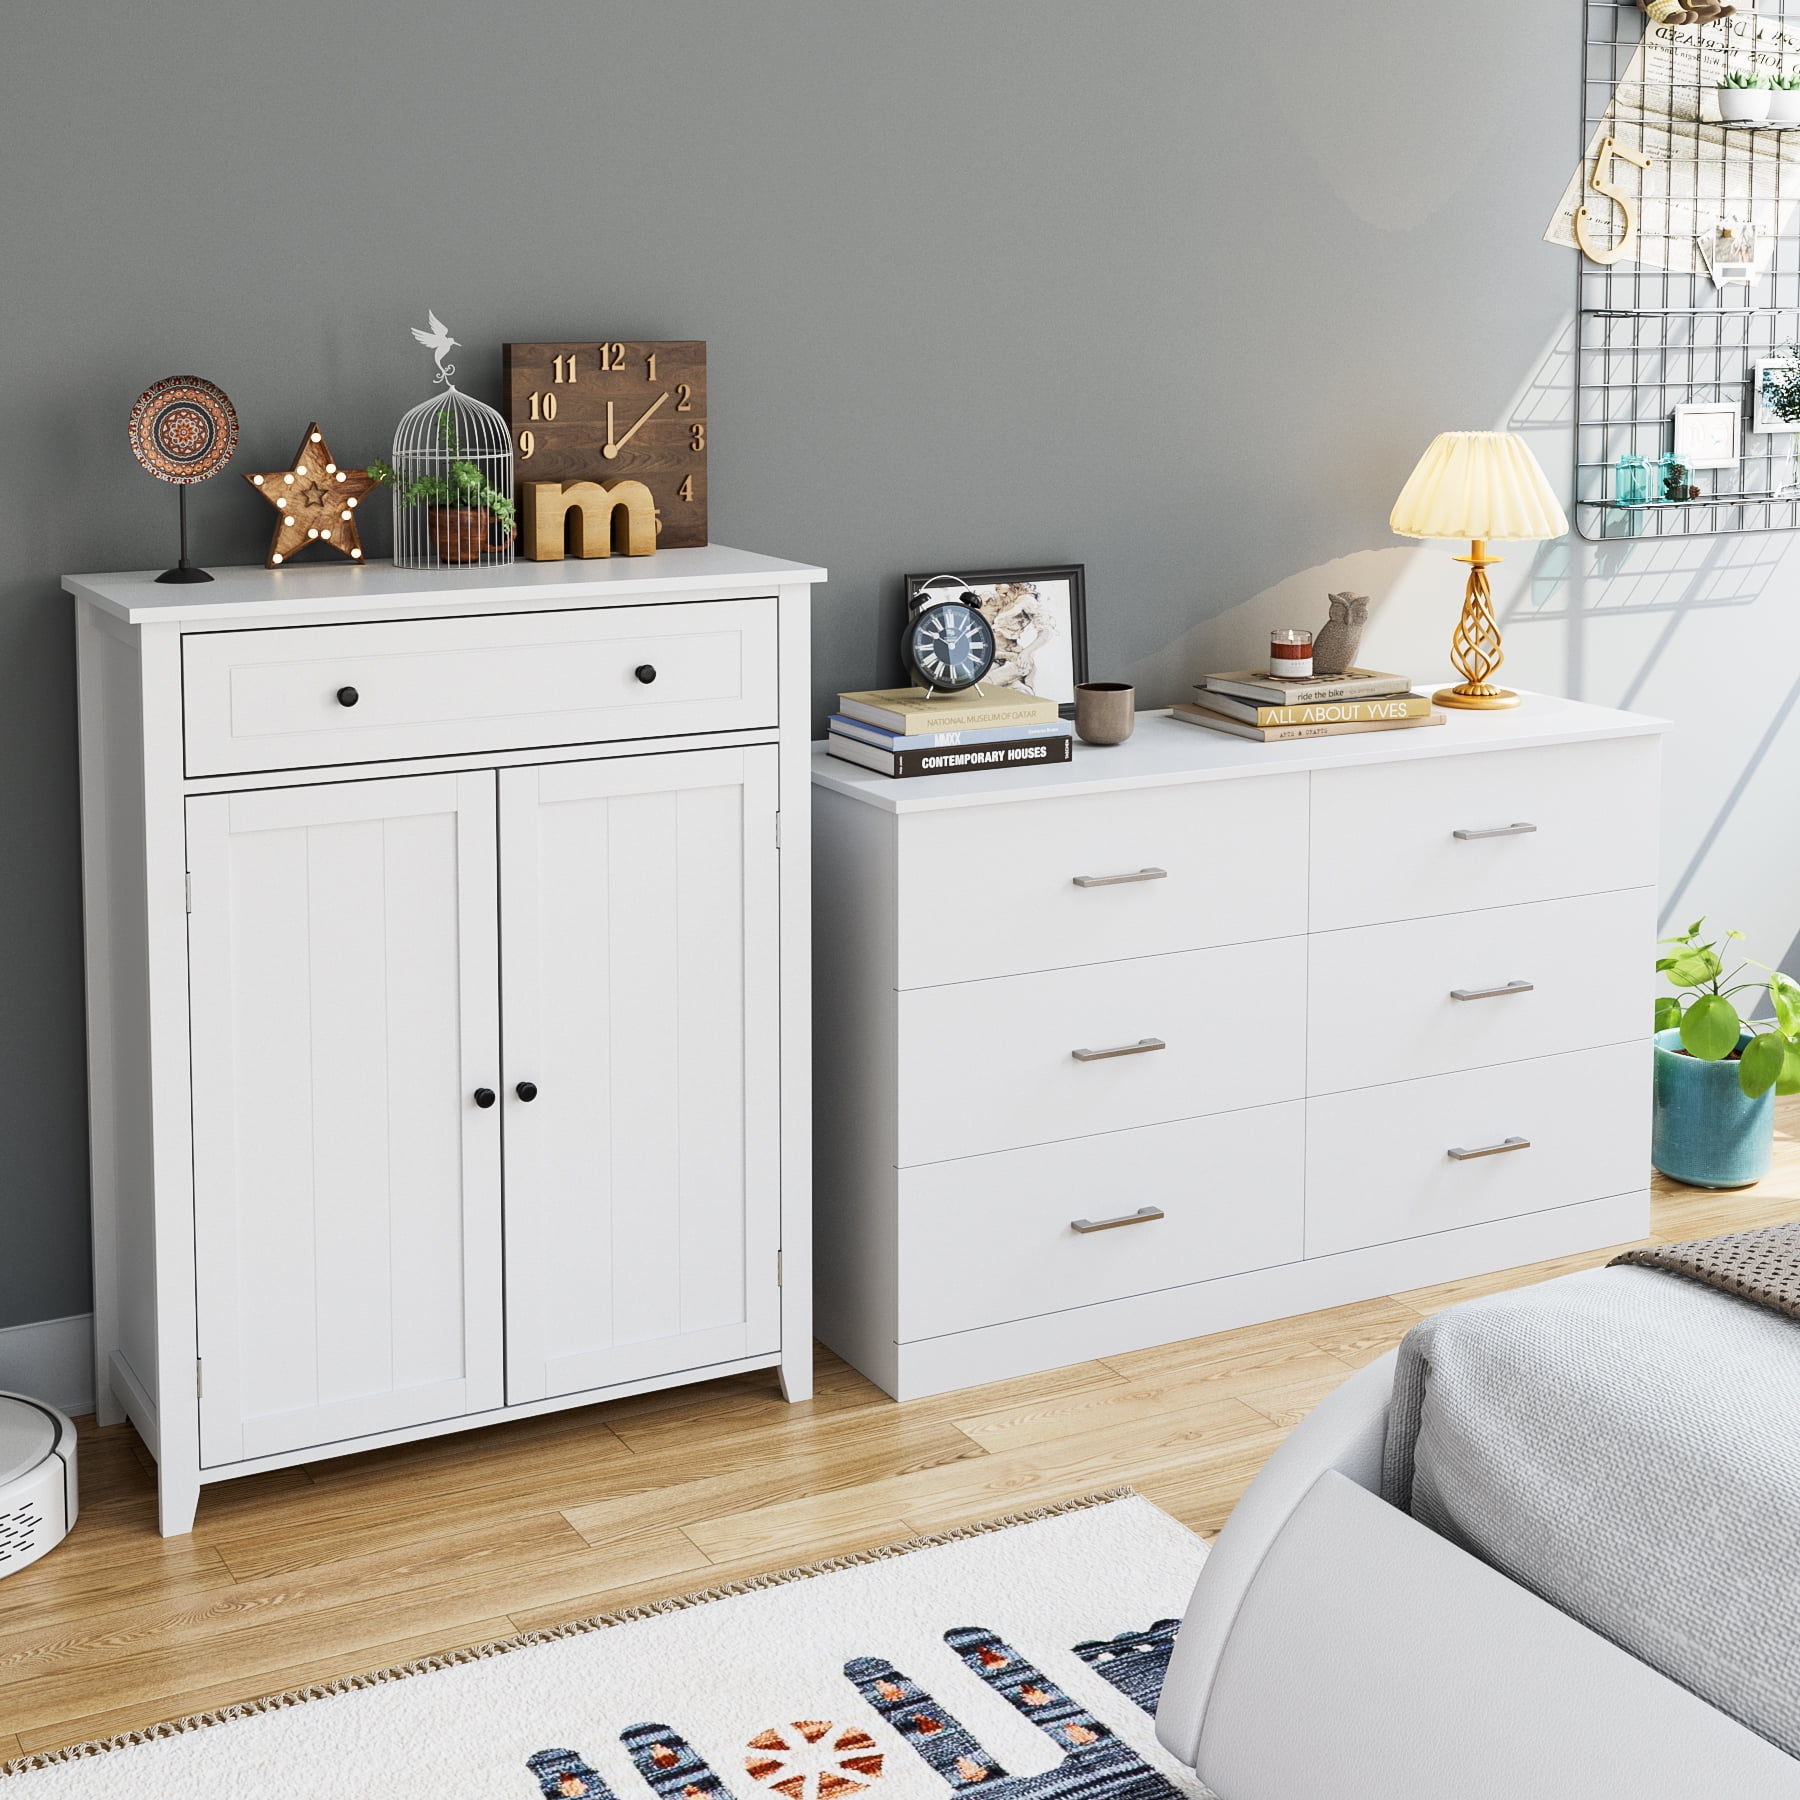 Buy Homfa 6 Drawer White Double Dresser, Wood Storage Cabinet with Easy ...